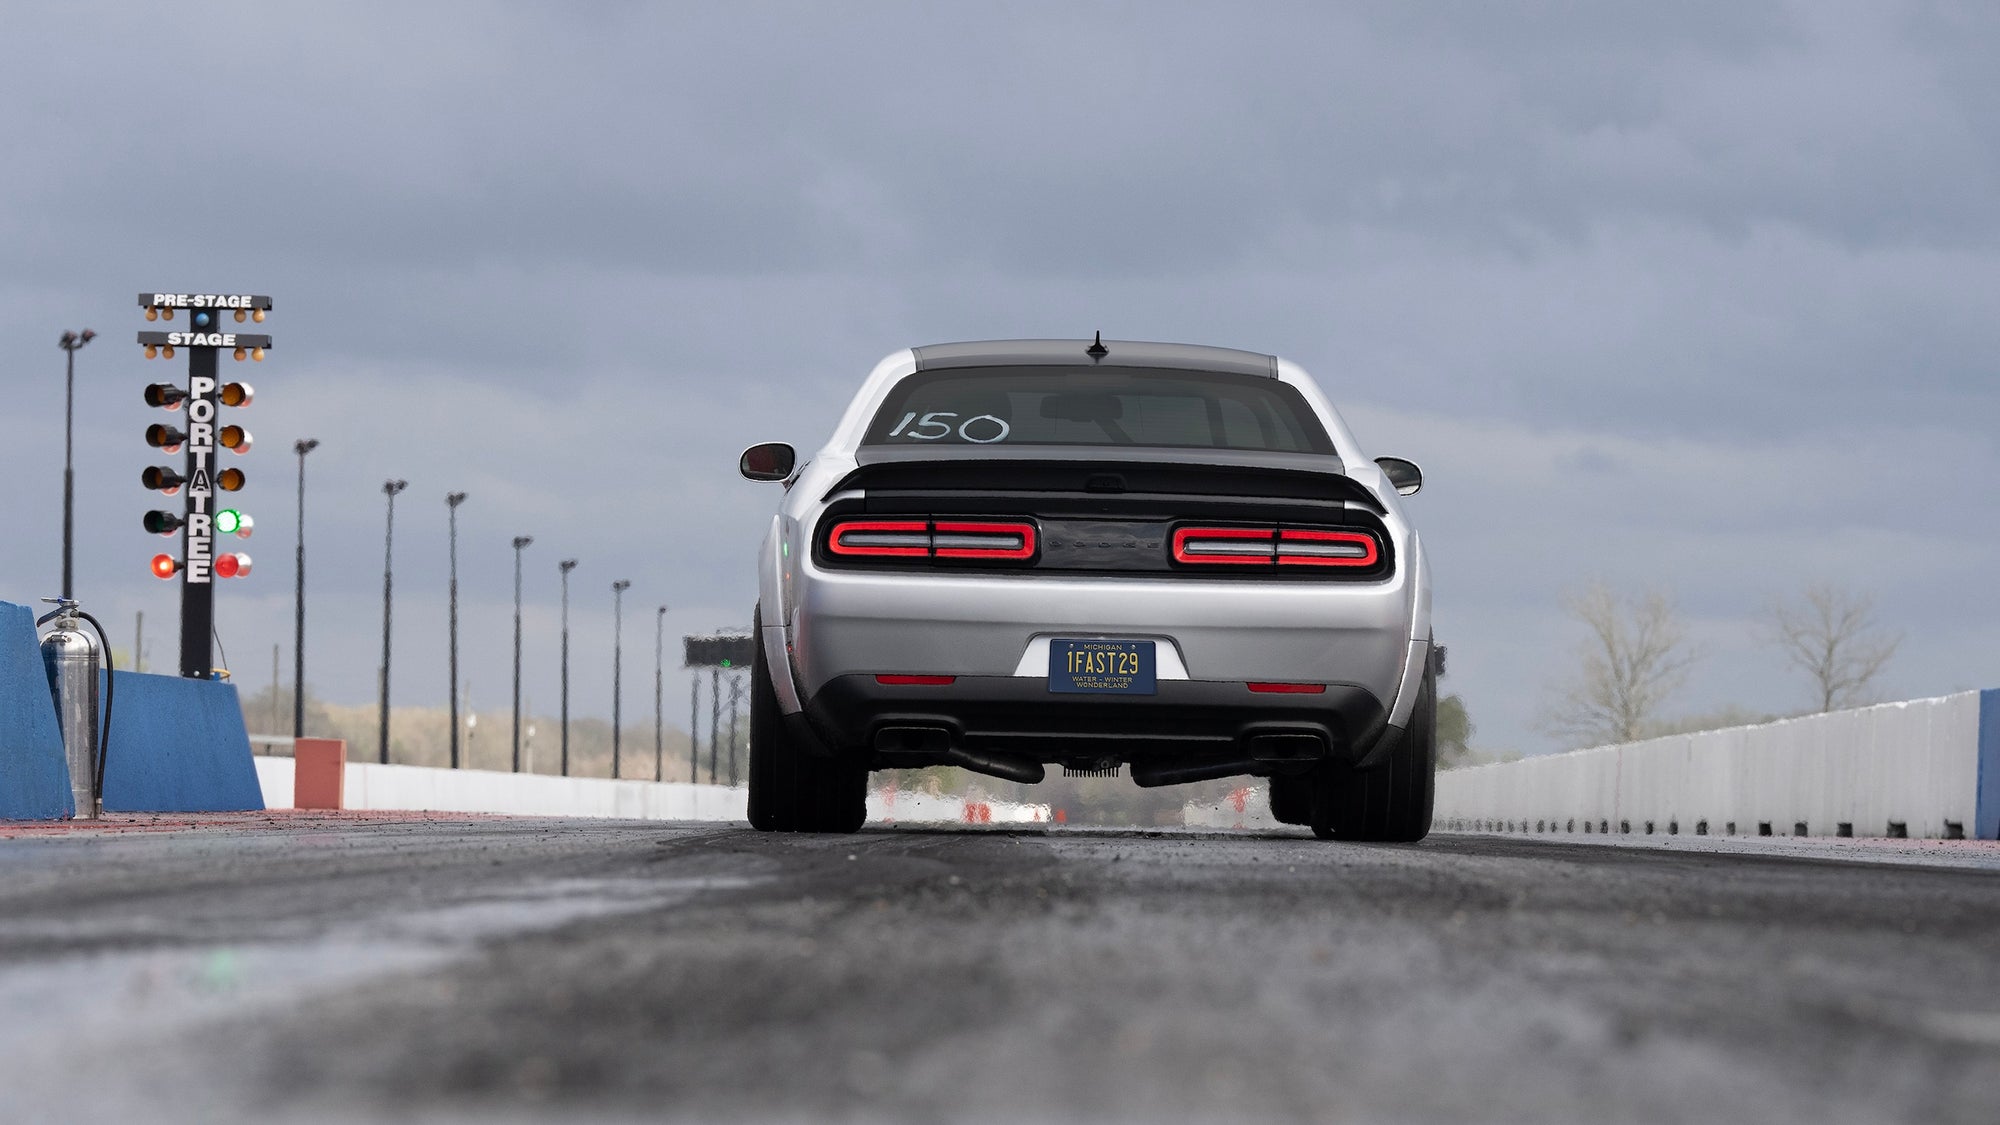 The production of the V8 Dodge Challenger has come to an end.